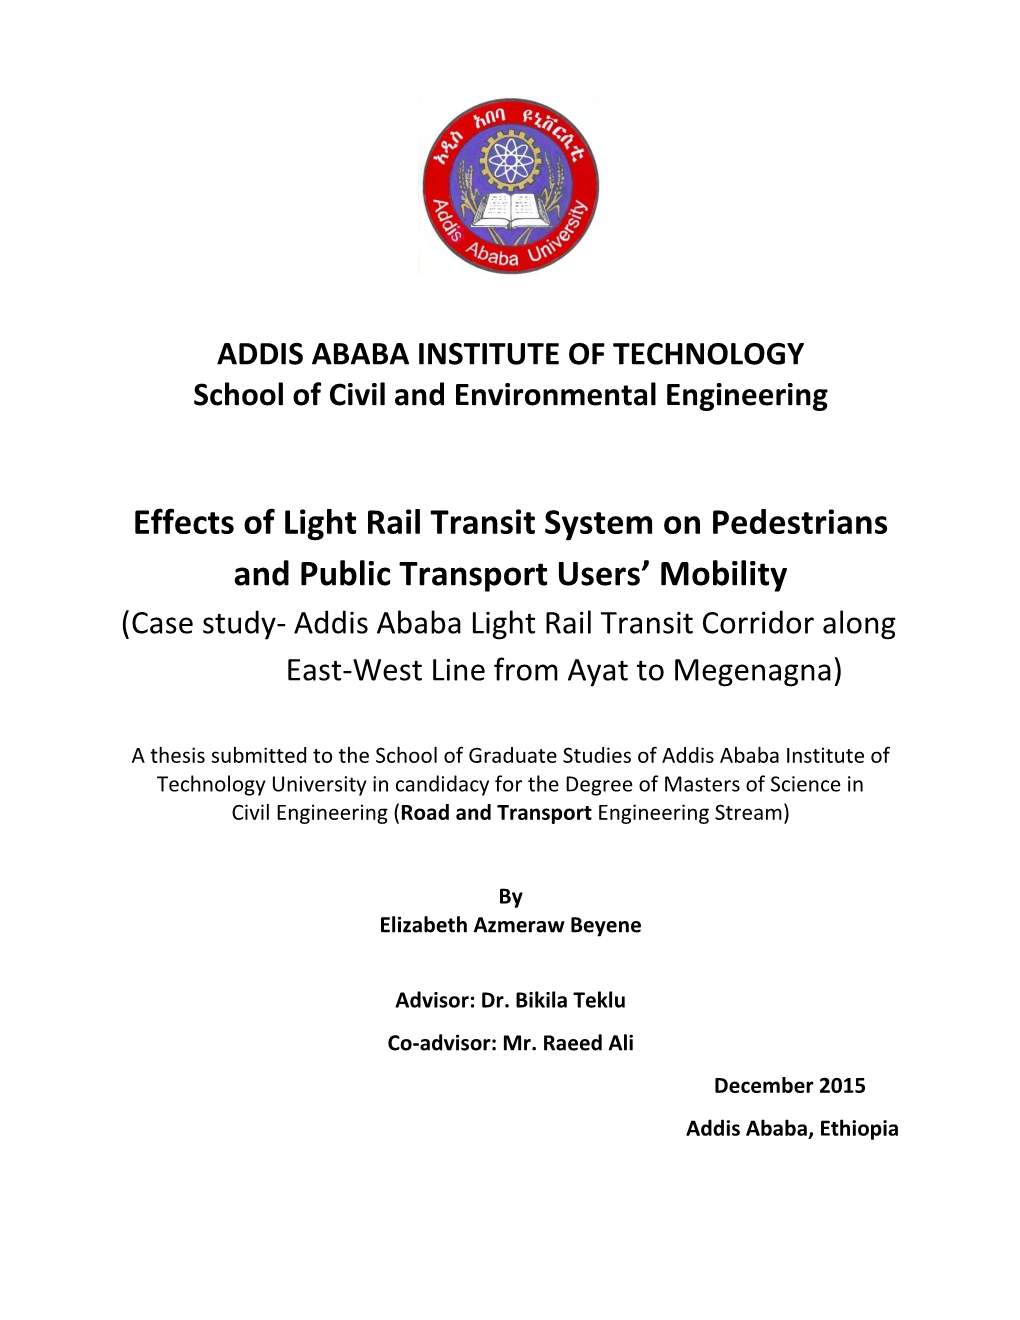 Effects of Light Rail Transit System on Pedestrians and Public Transport